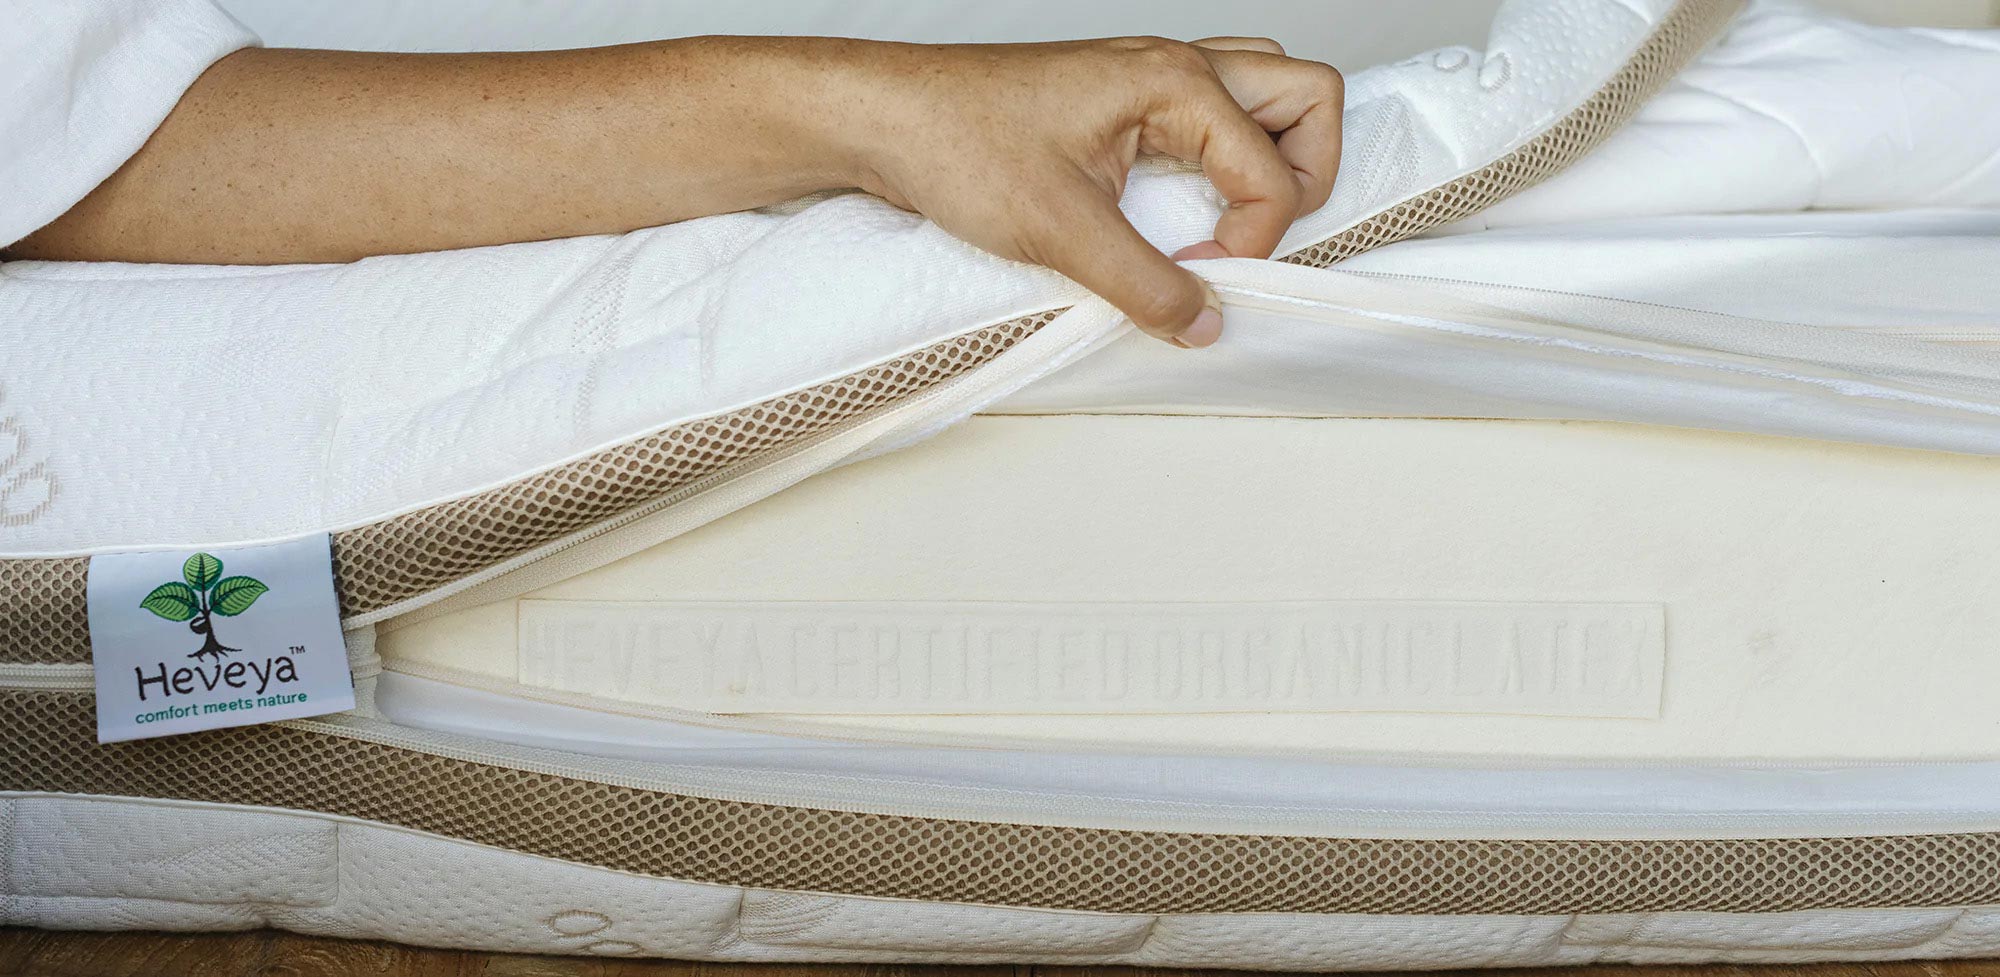 Is Having A Removable & Cleanable Mattress Cover Important